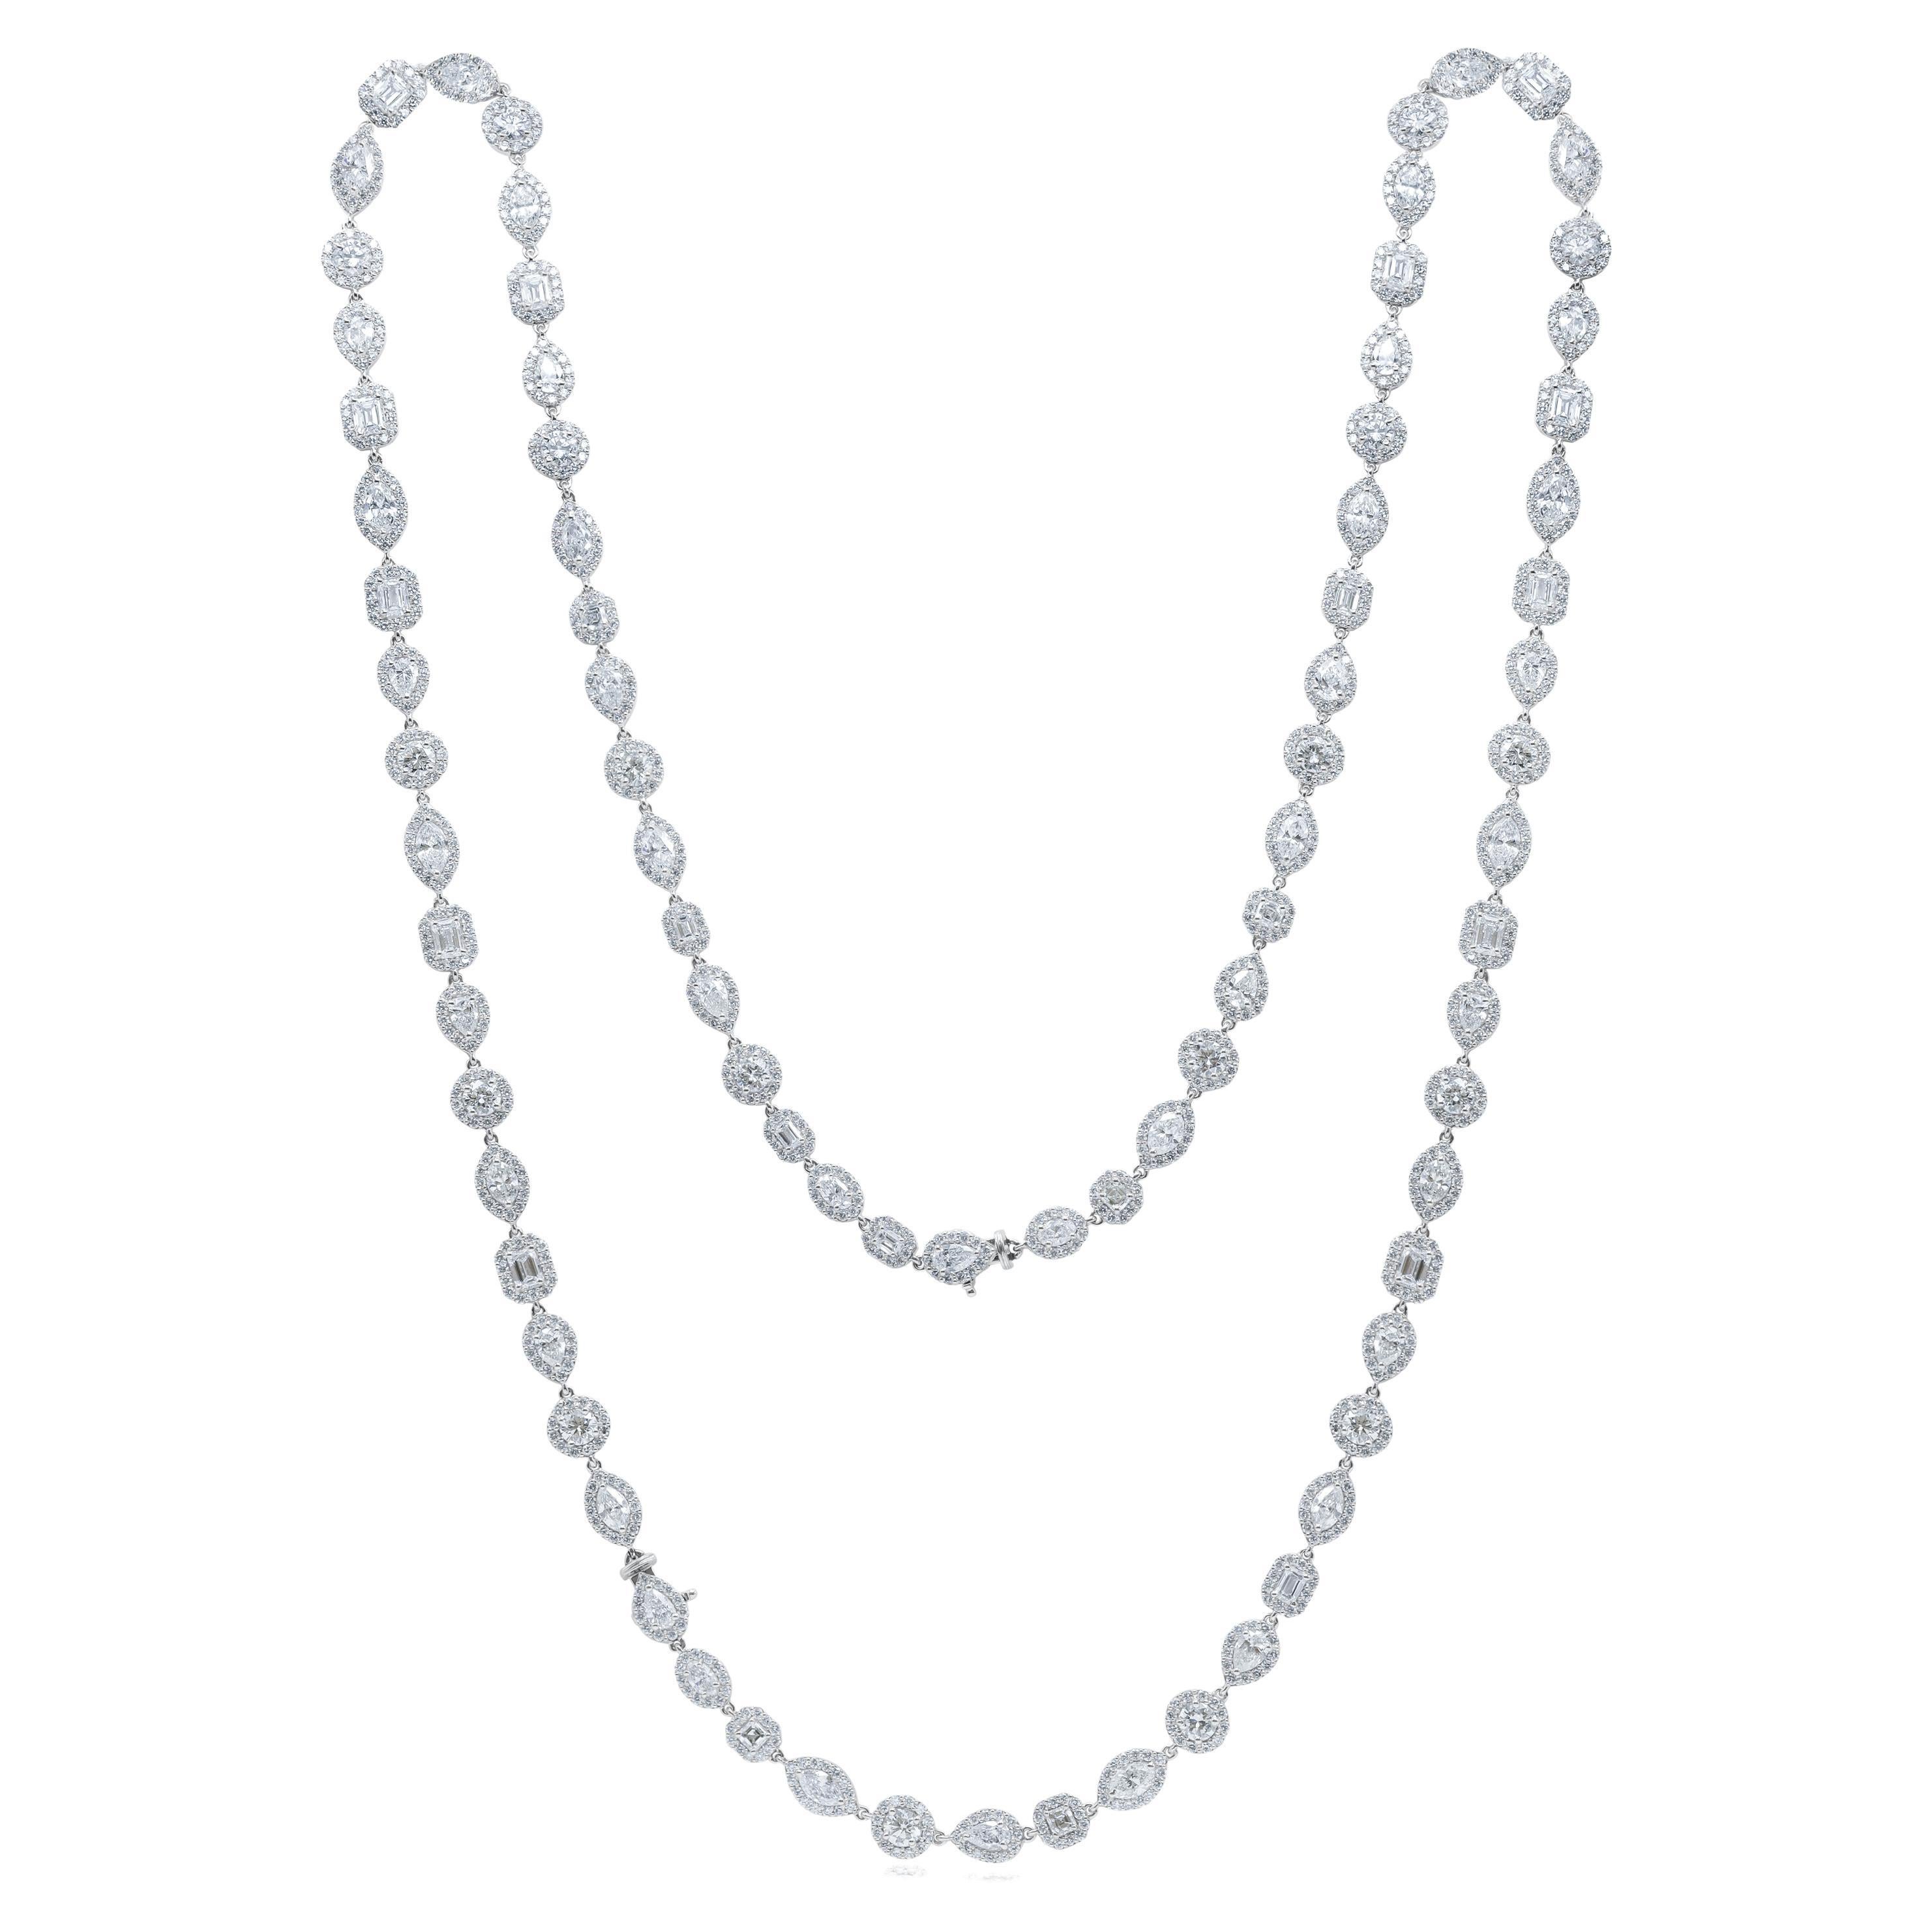 18kt White Gold Long Necklace Featuring 45.00 cts of marquise, asscher, oval